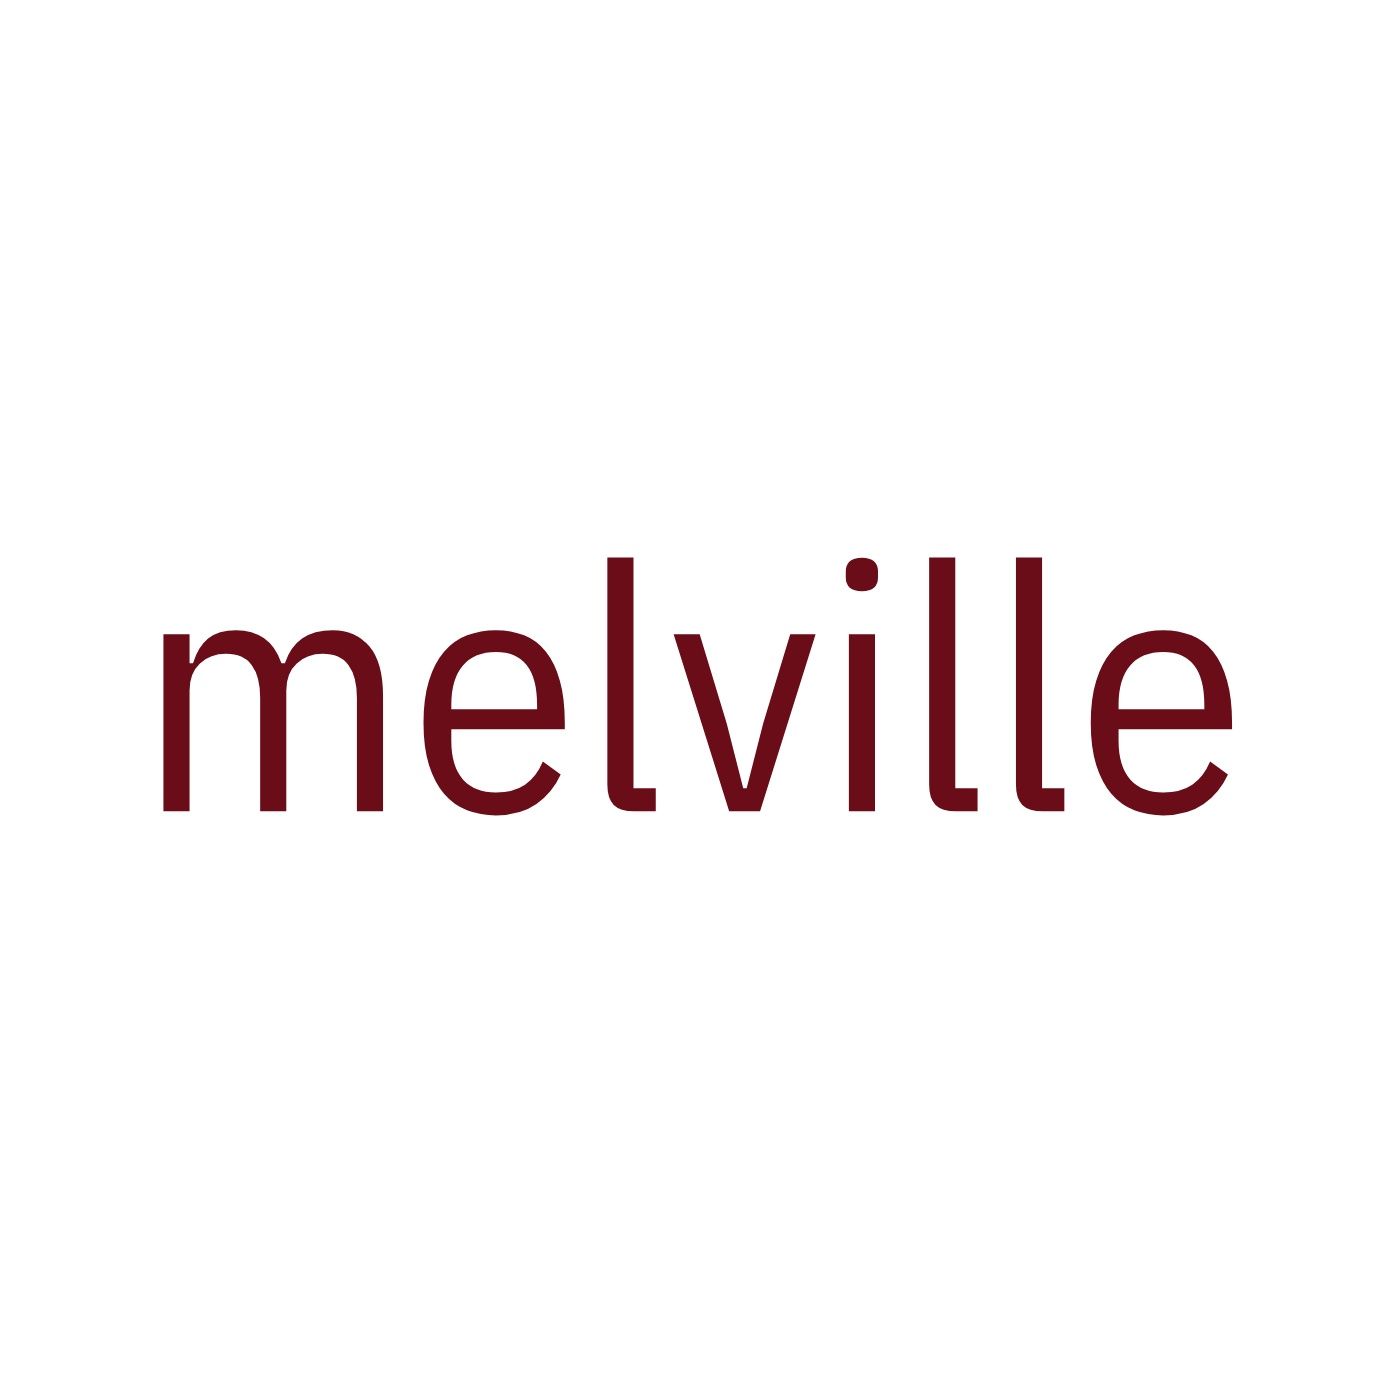 Melville - Chad Melville